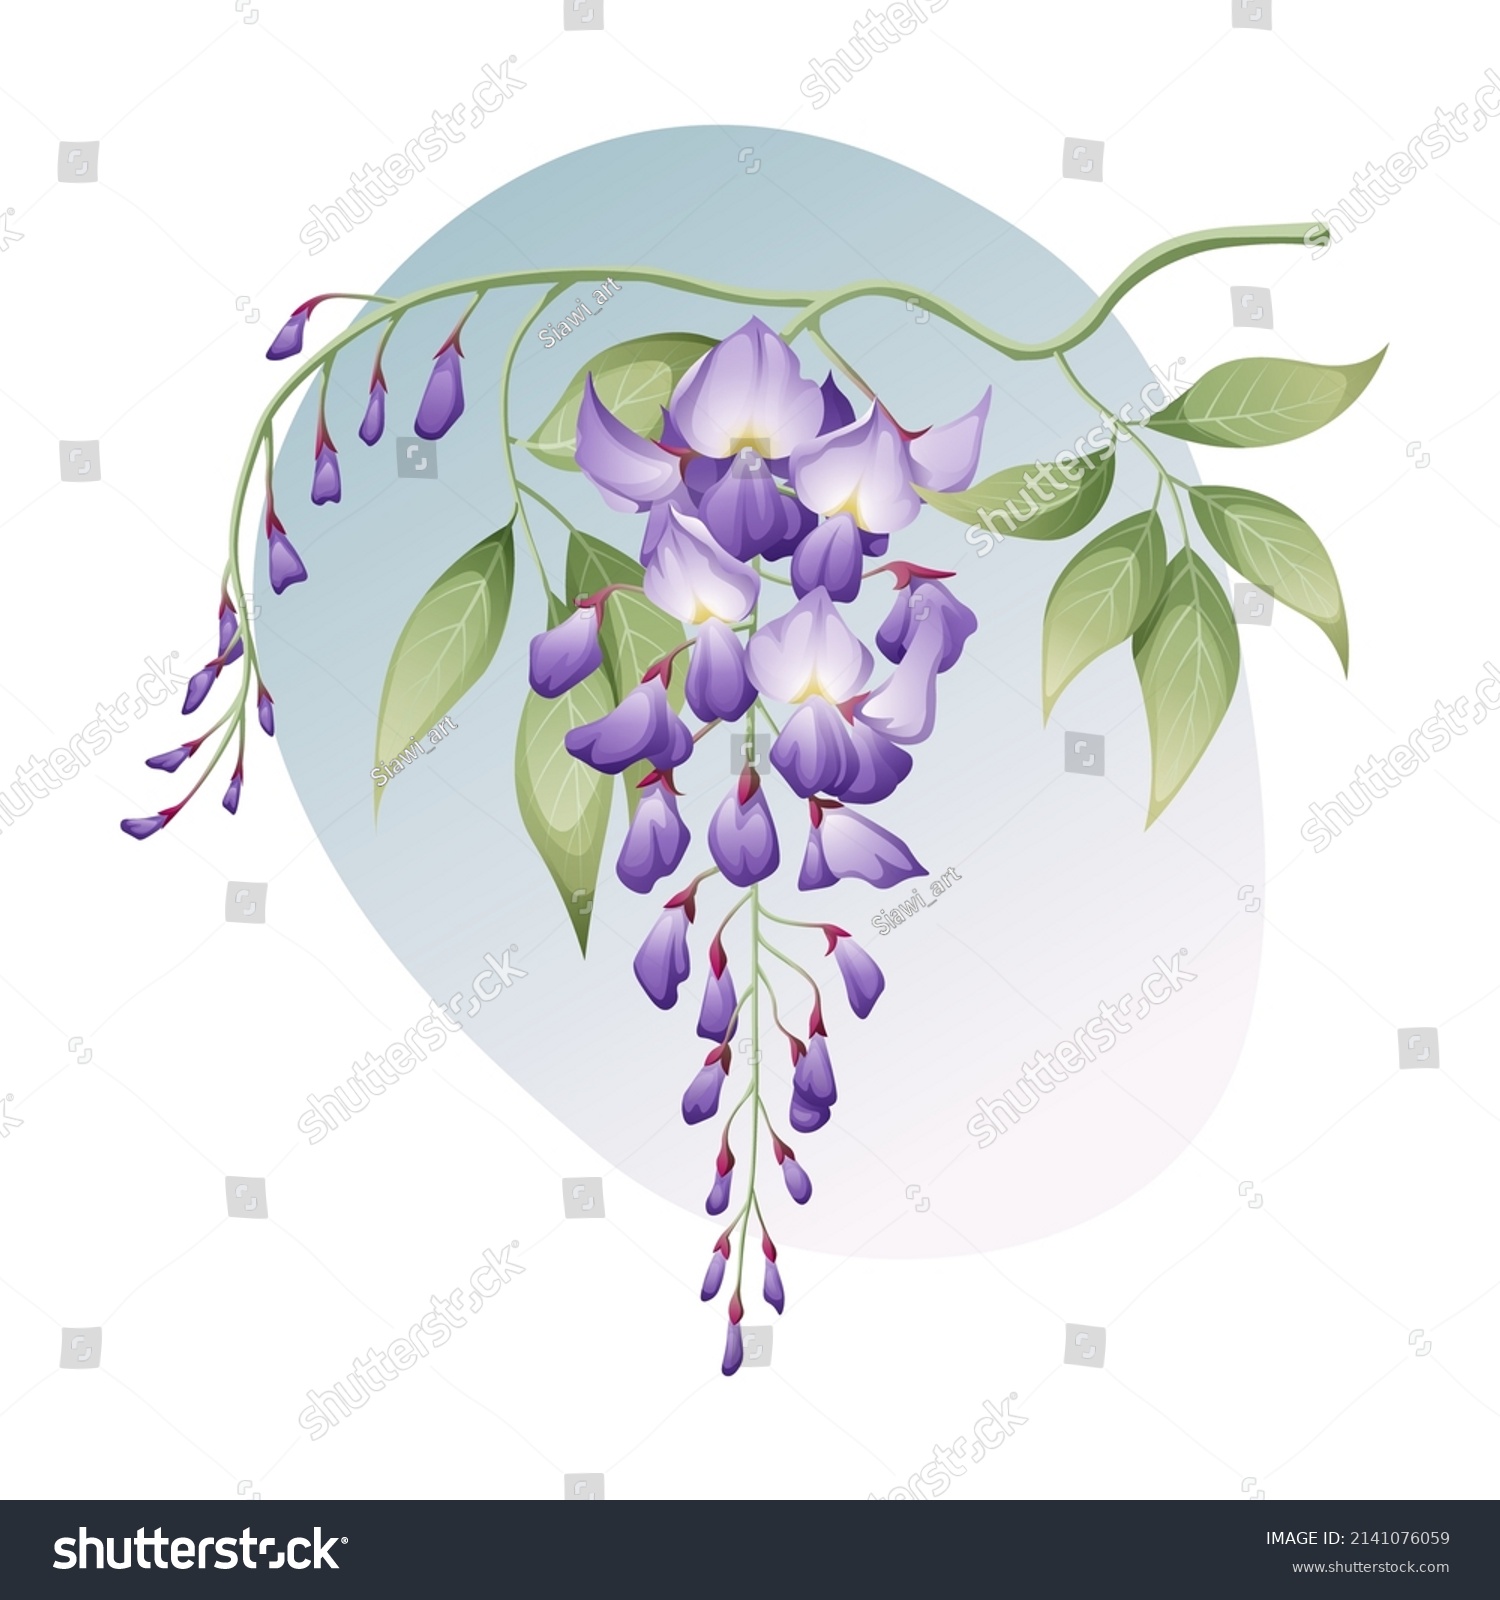 SVG of Wisteria with leaves on a white background. Floral illustration. Great for stickers, clothing design, covers, etc. svg